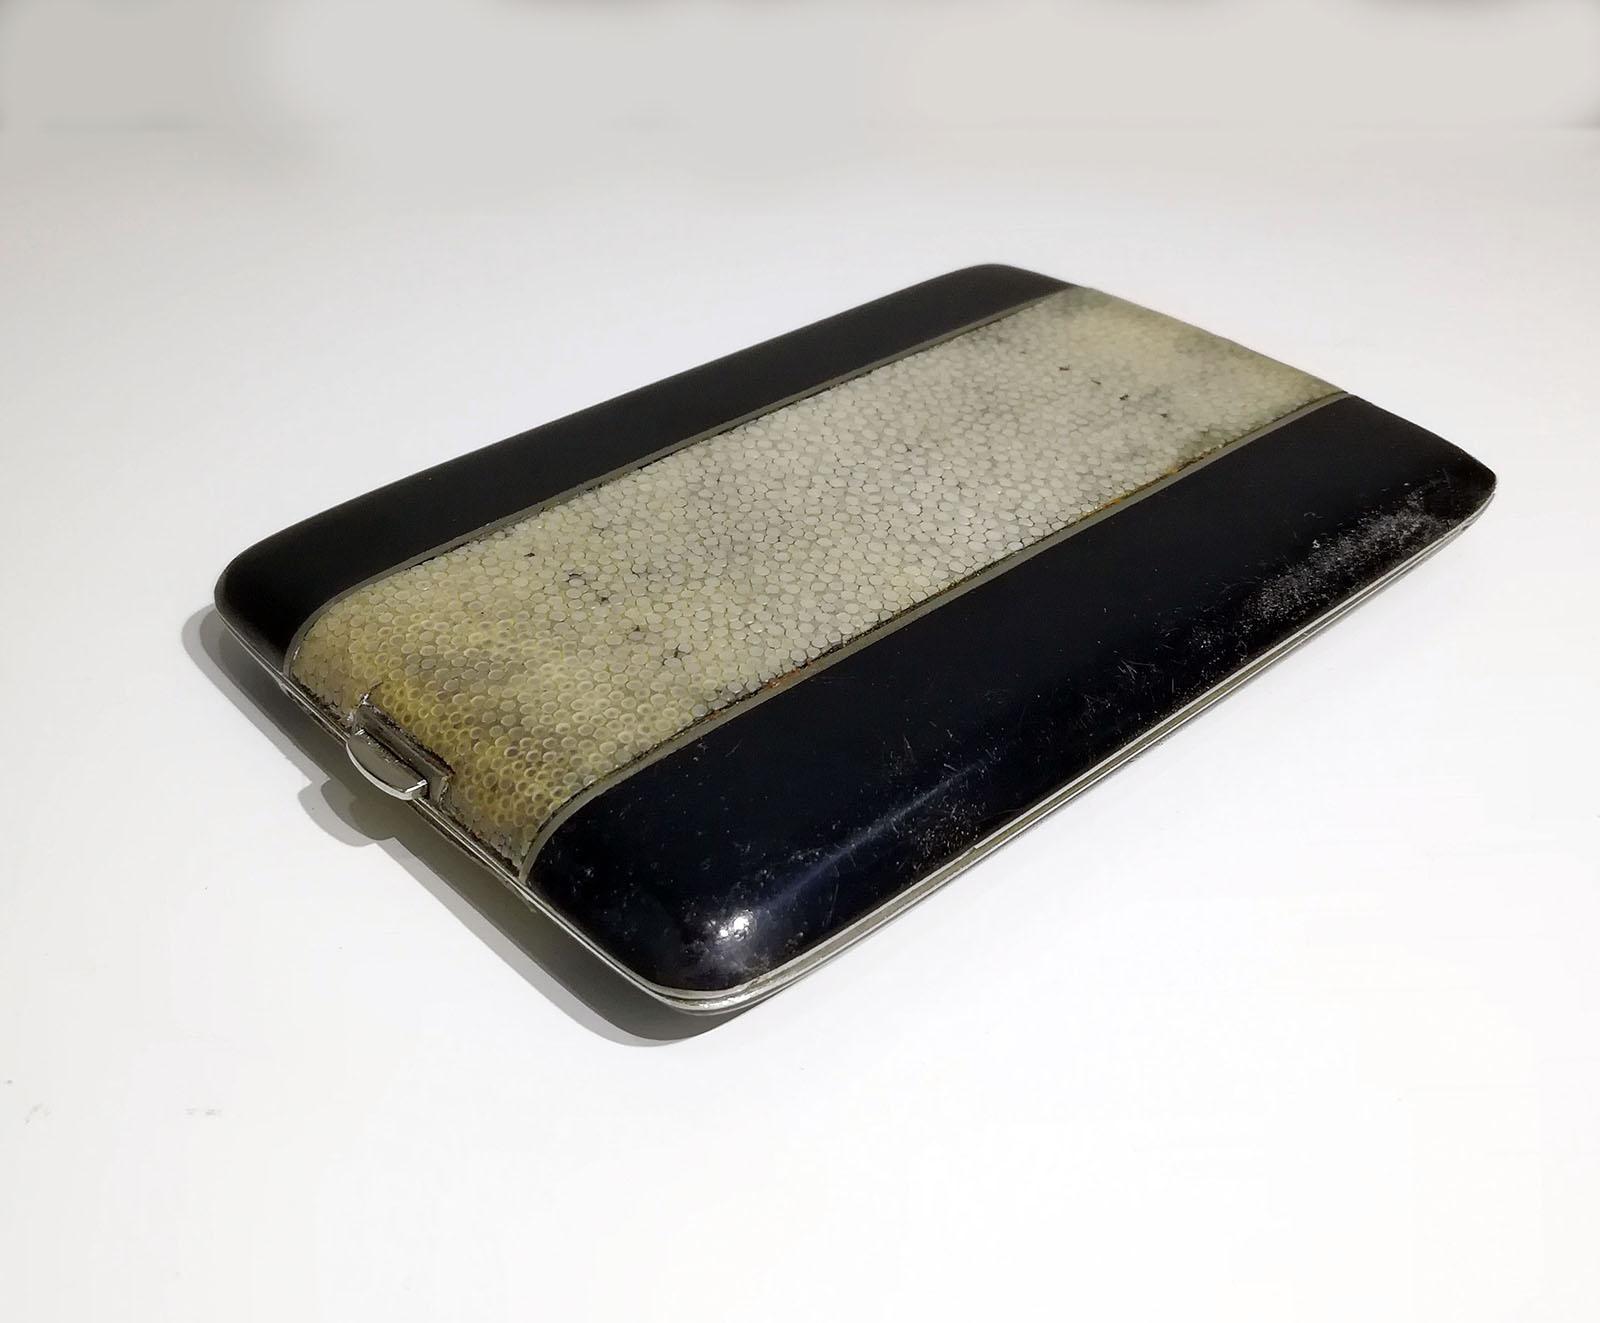 Black lacquered silver Cigarette case, has particularly lovely shagreen (GALUCHAT) band on the top. 
Stamped “Kraft Al Pacca” and “Argent” from the inside.
The wonderful Galuchat makes it one of the few and most beautiful examples of Art Deco